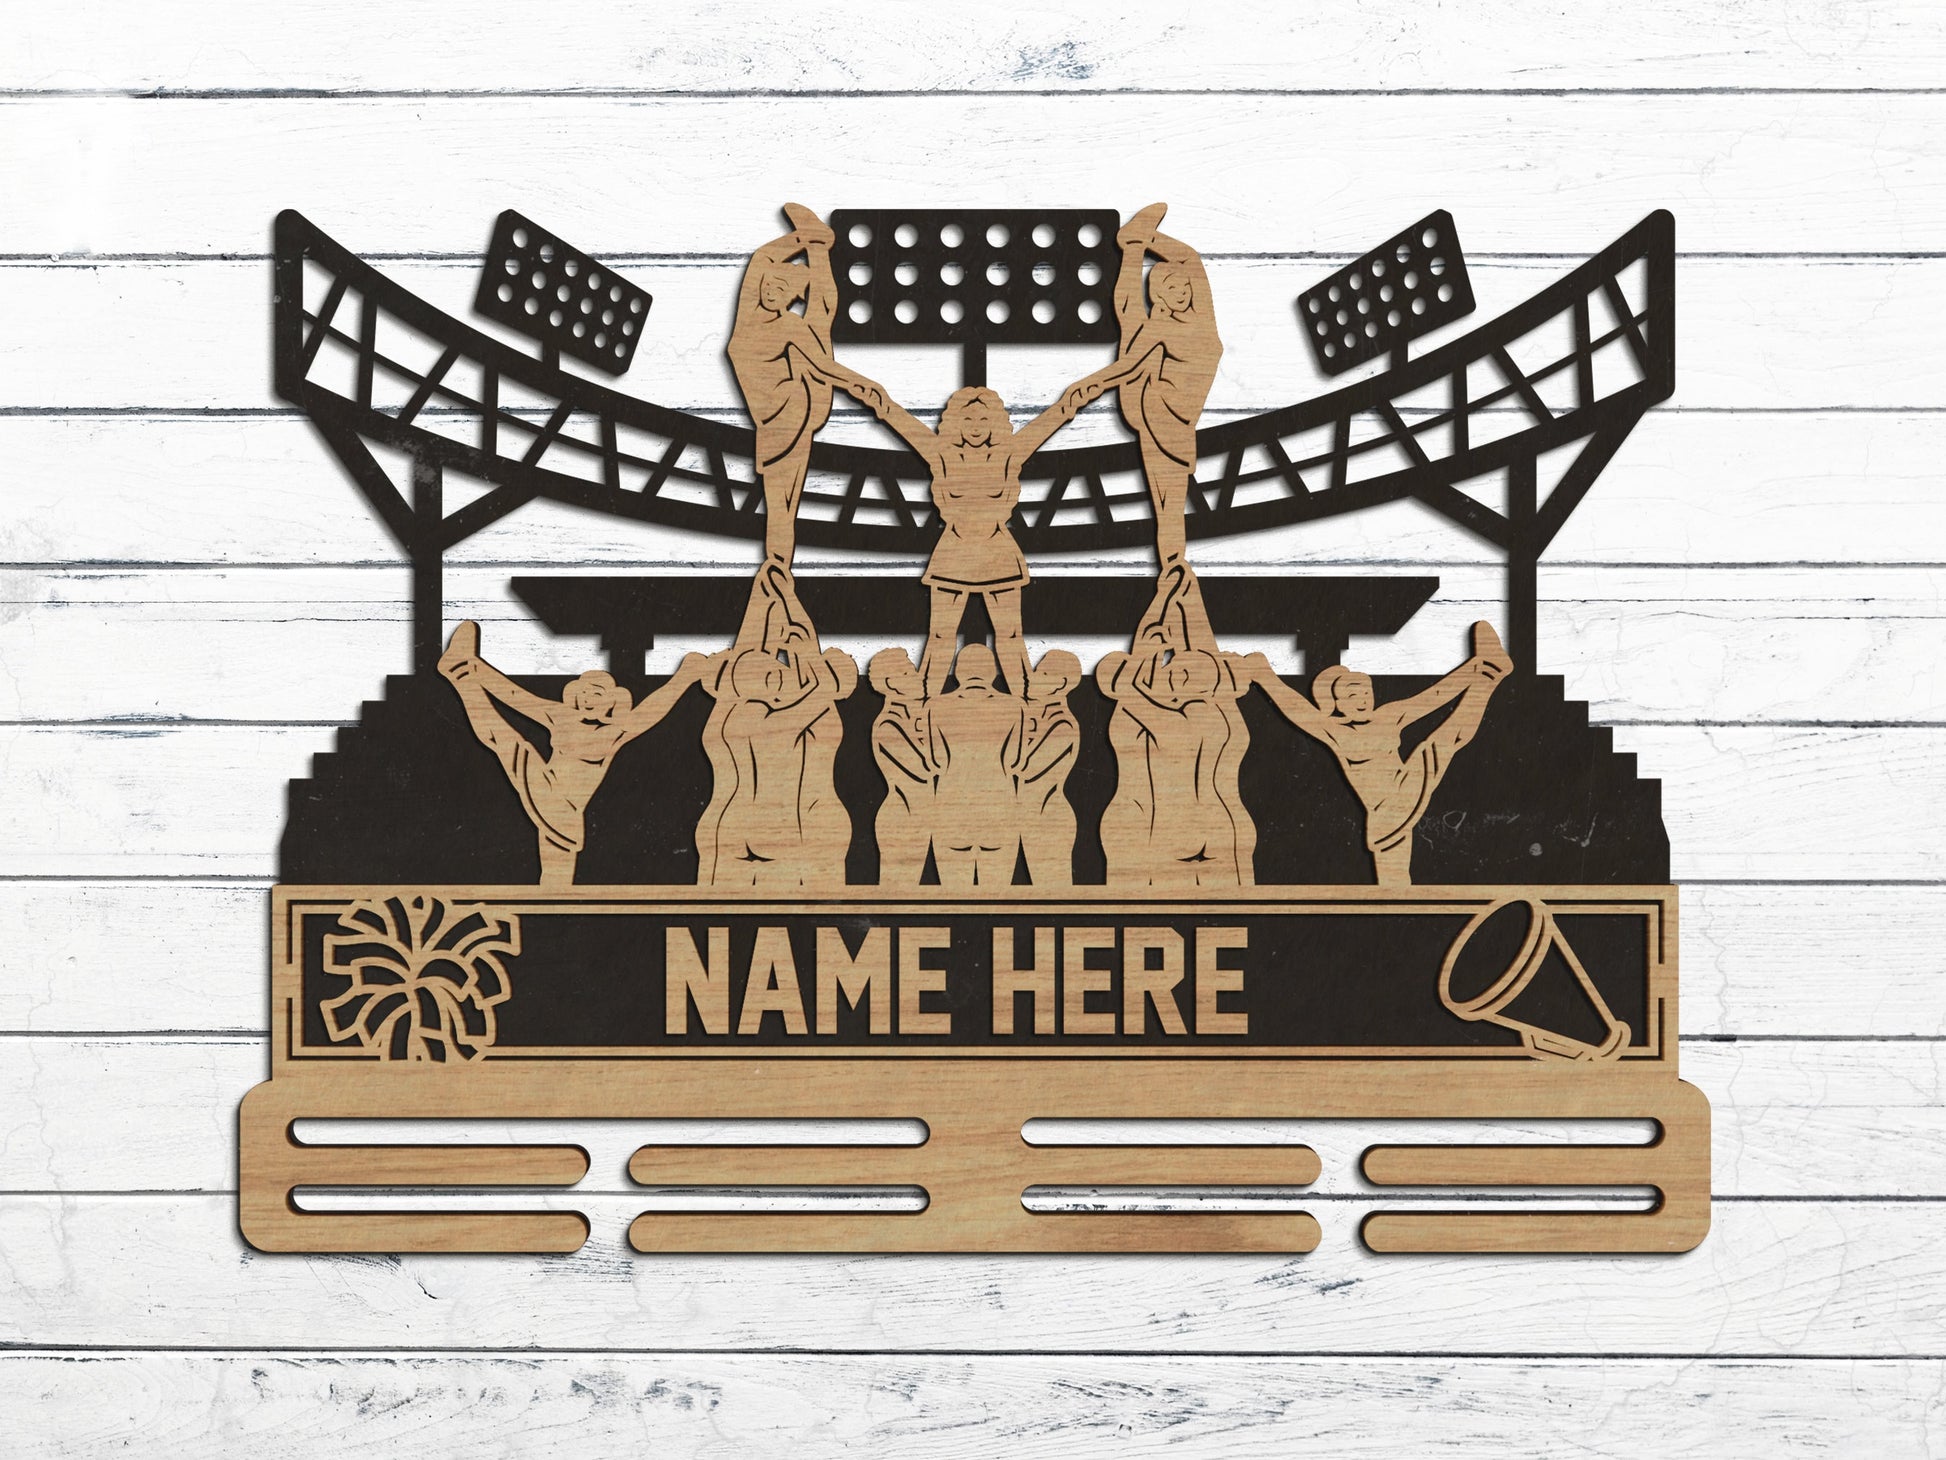 Stadium Series Medal Holders Expansion 1 - 5 Sports Included - Male and Female Versions - SVG, PDF, AI Files - Glowforge & Lightburn Tested